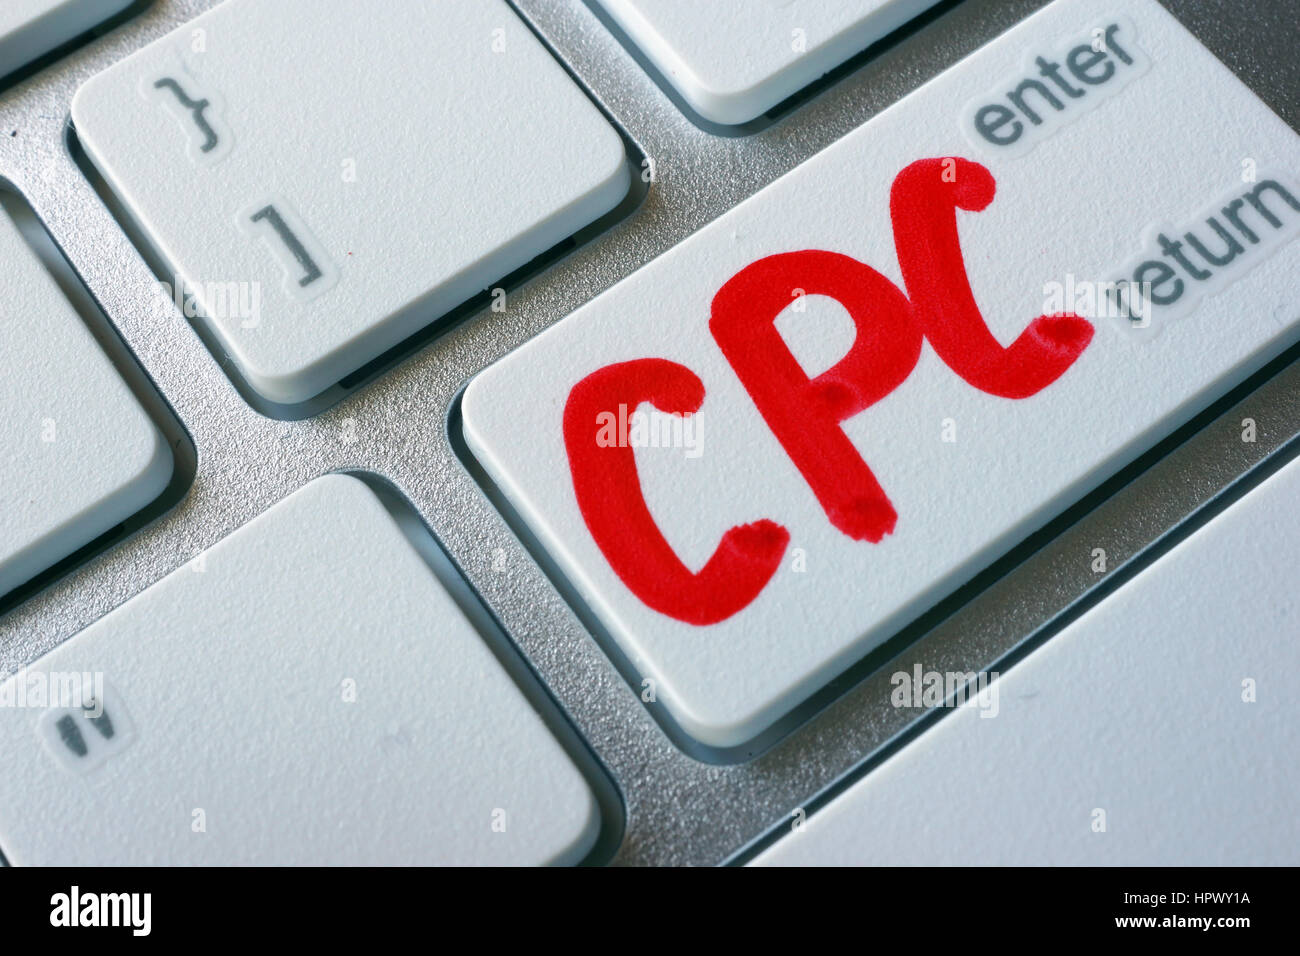 Word CPC (cost per click) written on a keyboard. Stock Photo